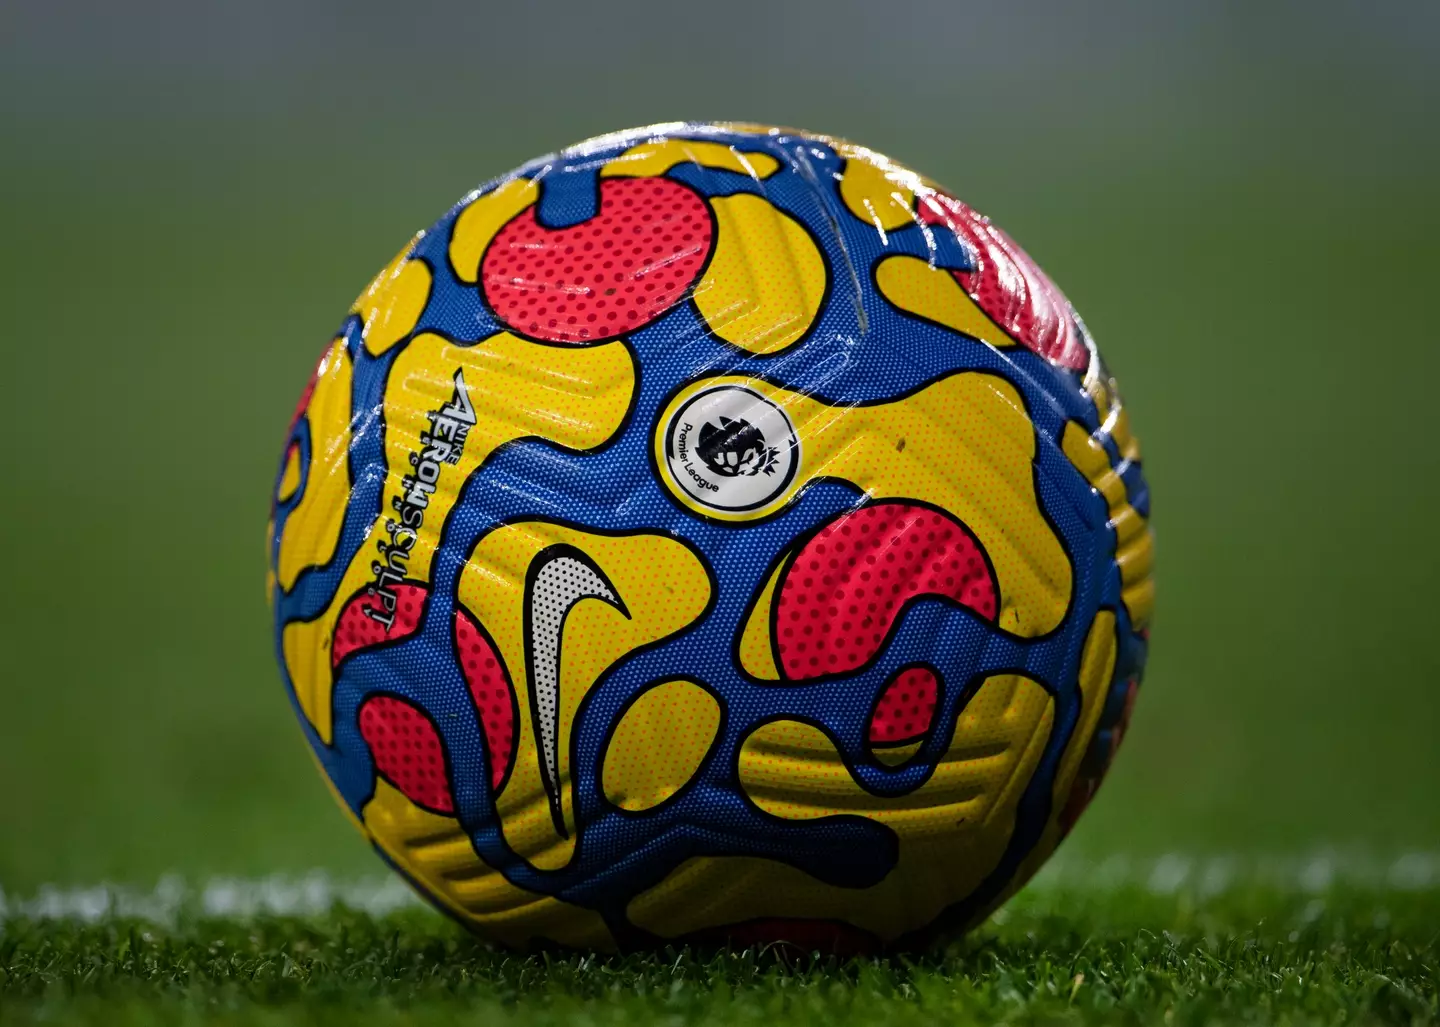 The official Premier League match ball by Nike. Image: Getty